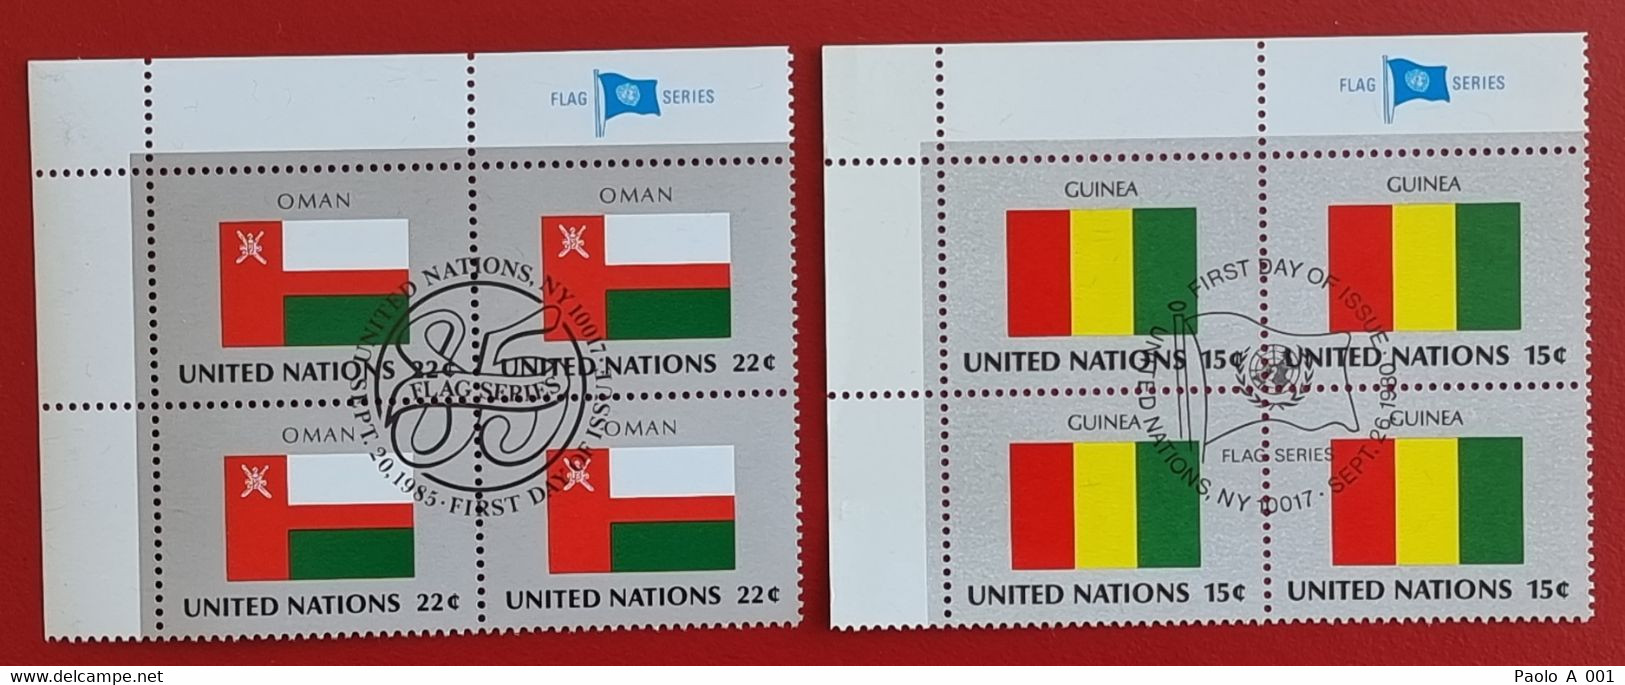 UNO NEW YORK 1980 1985 OMAN ASIA GUINEA AFRICA FLAG OF NATIONS BLOC OF FOUR FIRST DAY FULL GUM - Oblitérés